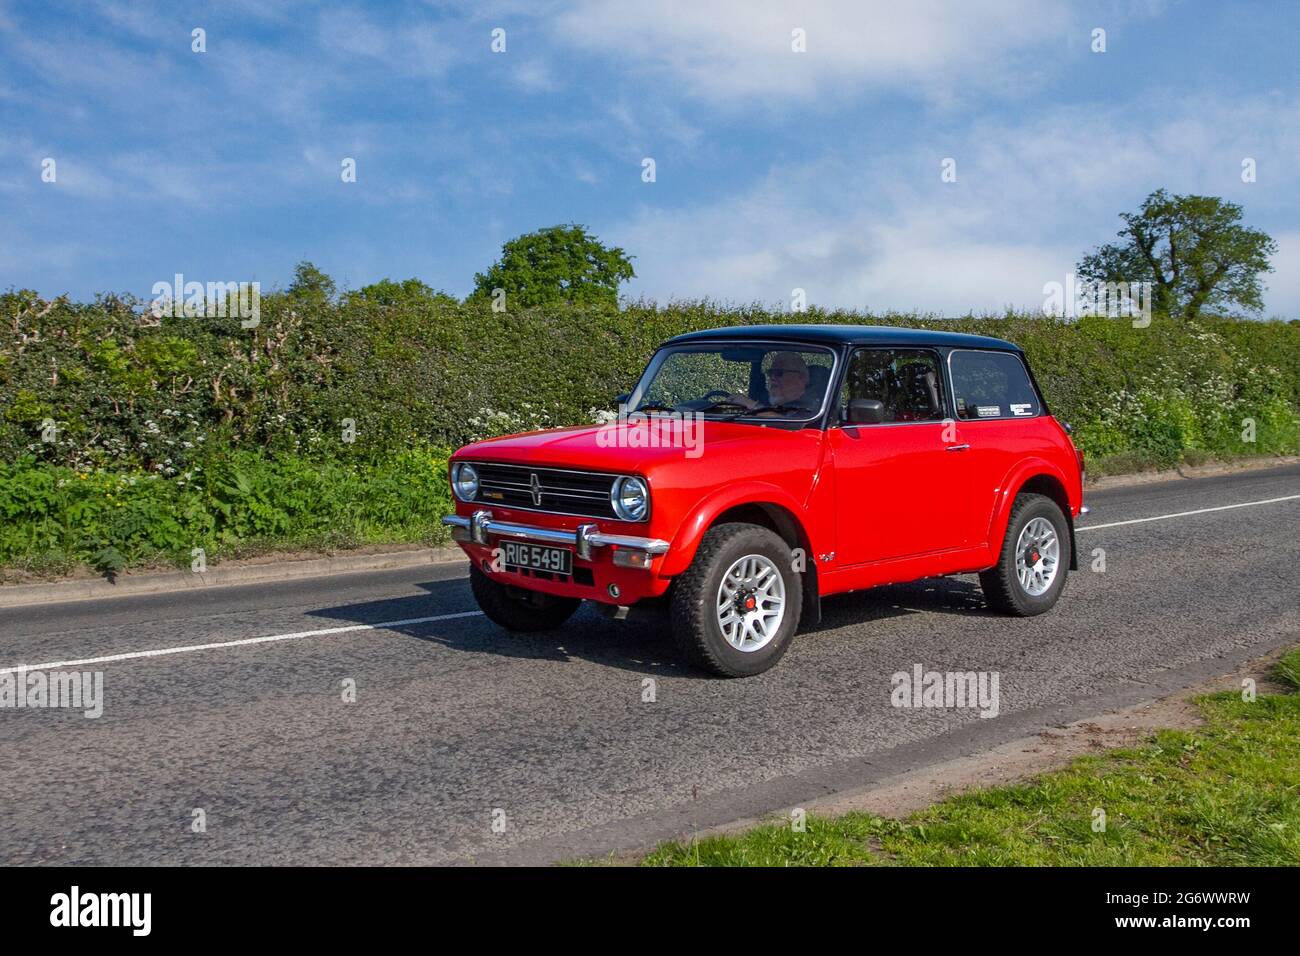 1972 red customised 2dr Mini 1590cc petrol en-route to Capesthorne Hall classic May car show, Cheshire, UK Stock Photo